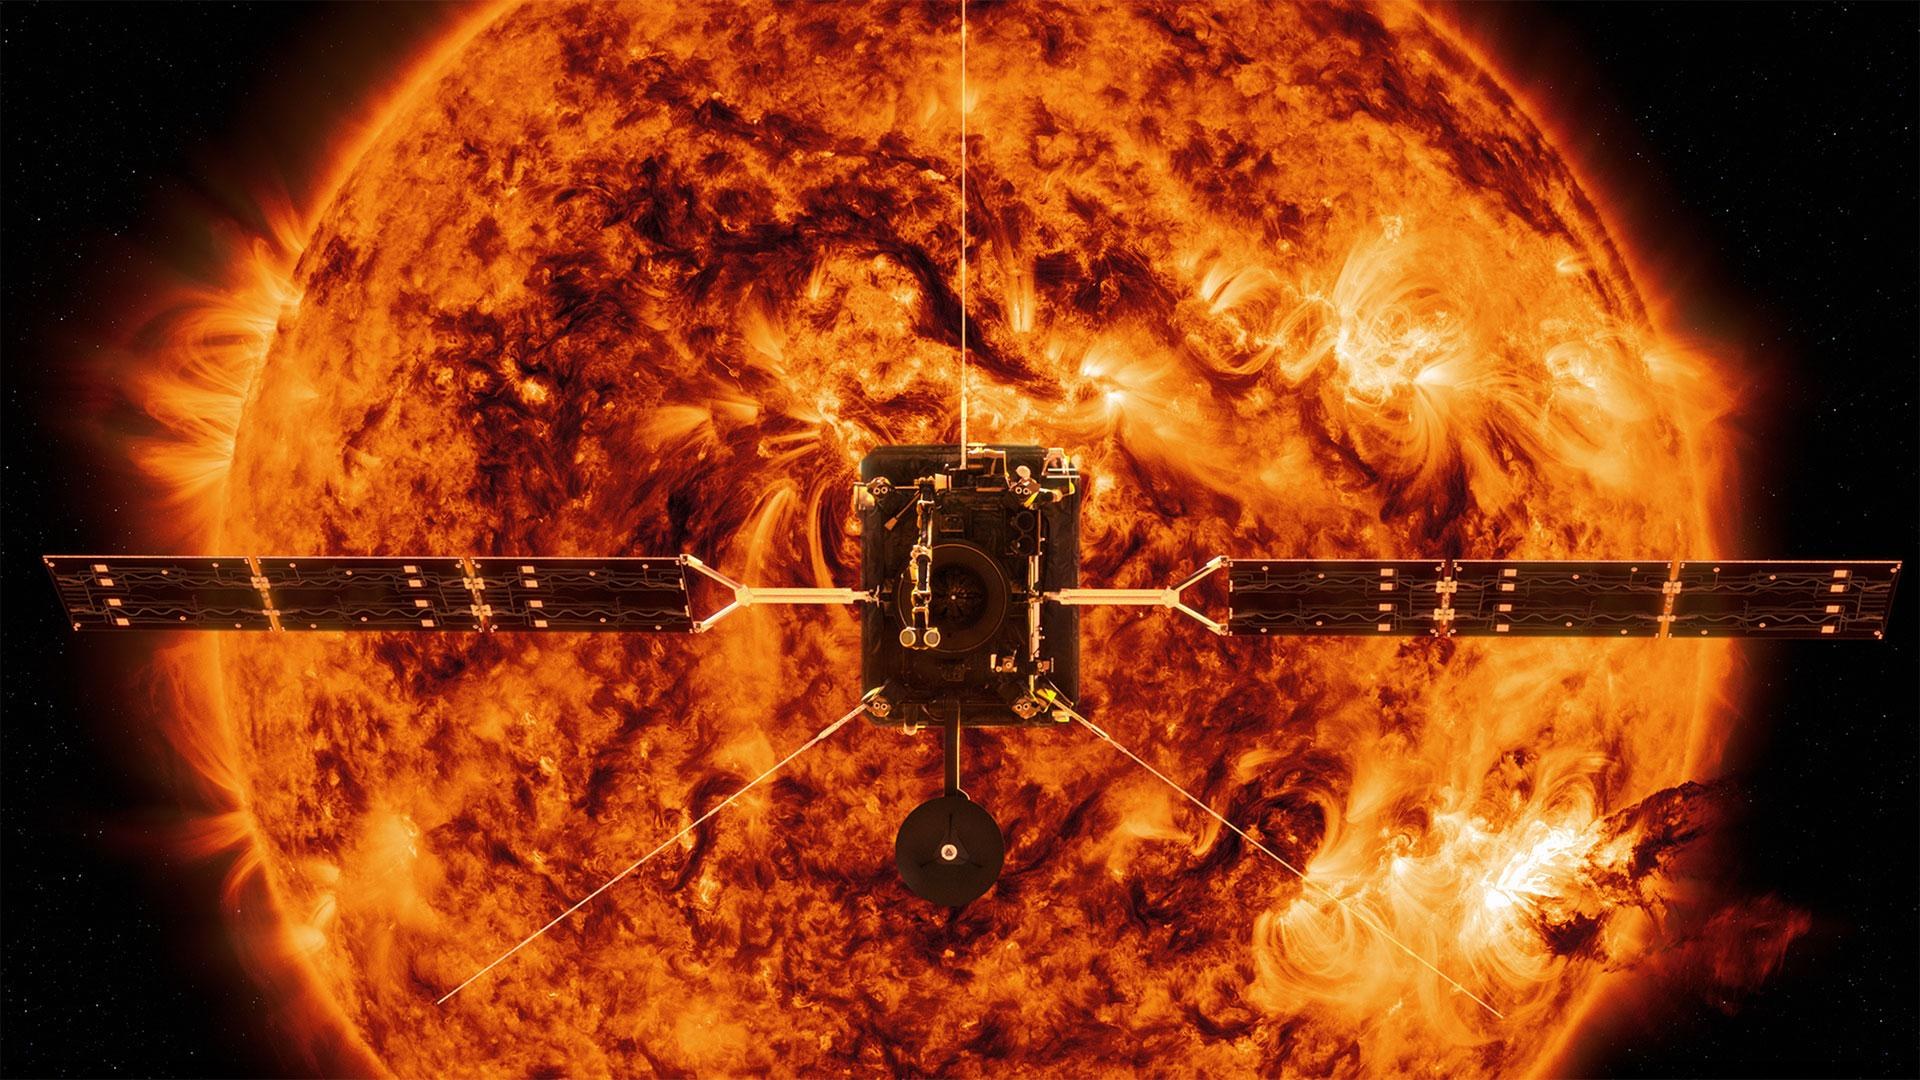 Artist's impression of Solar Orbiter in front of the glowing sun